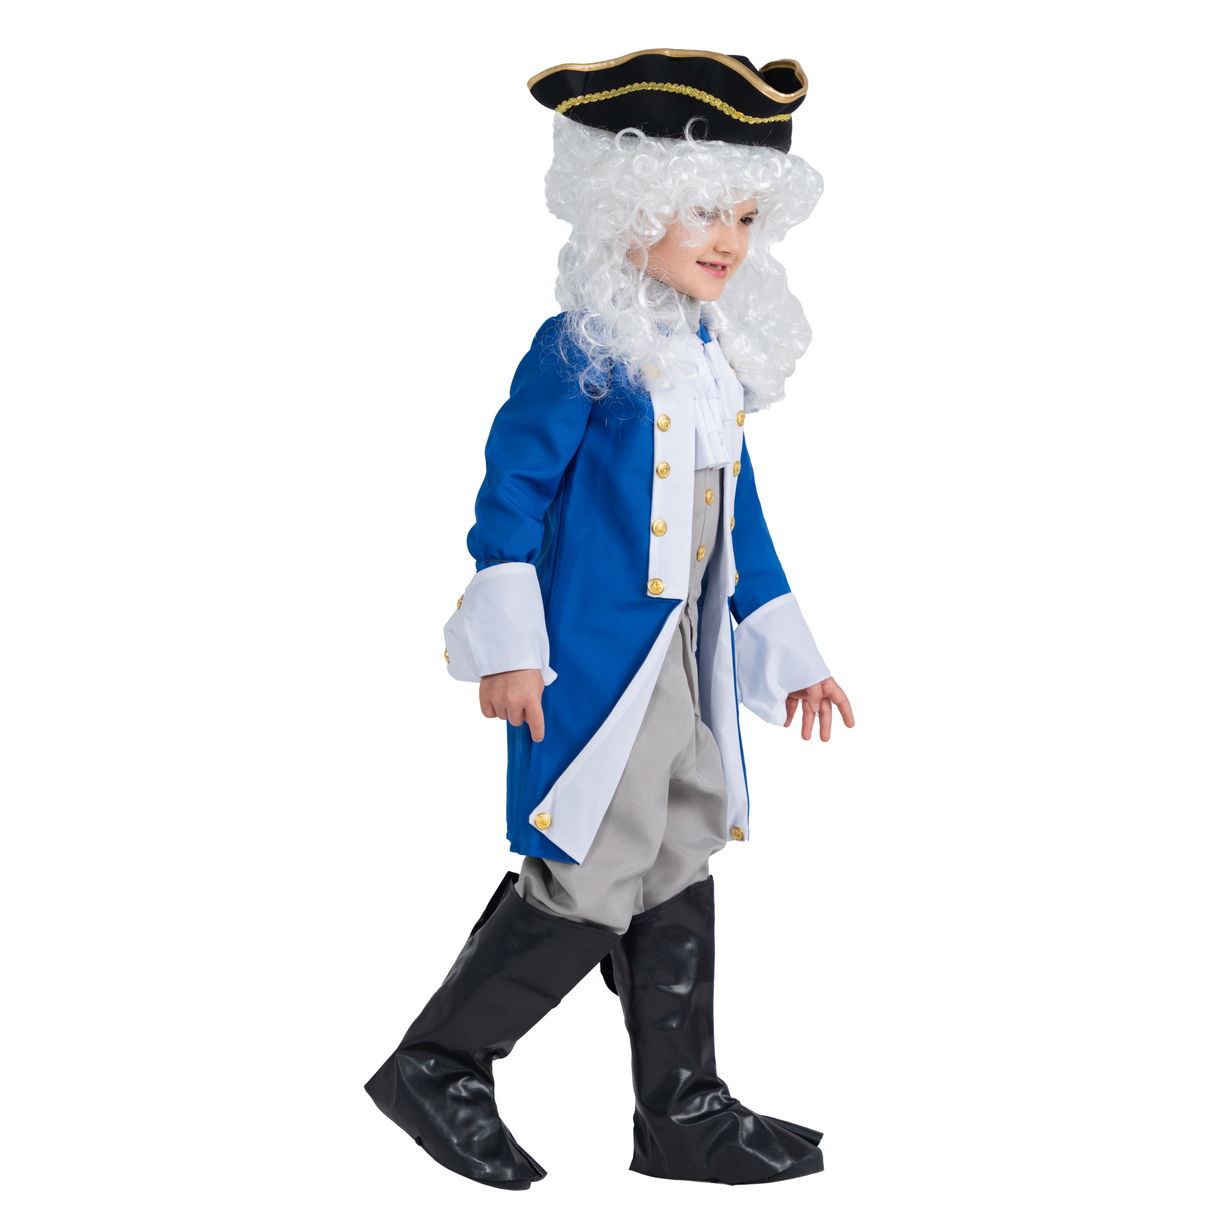 Dress Up America Colonial Patriot Costume with Hat and Wig